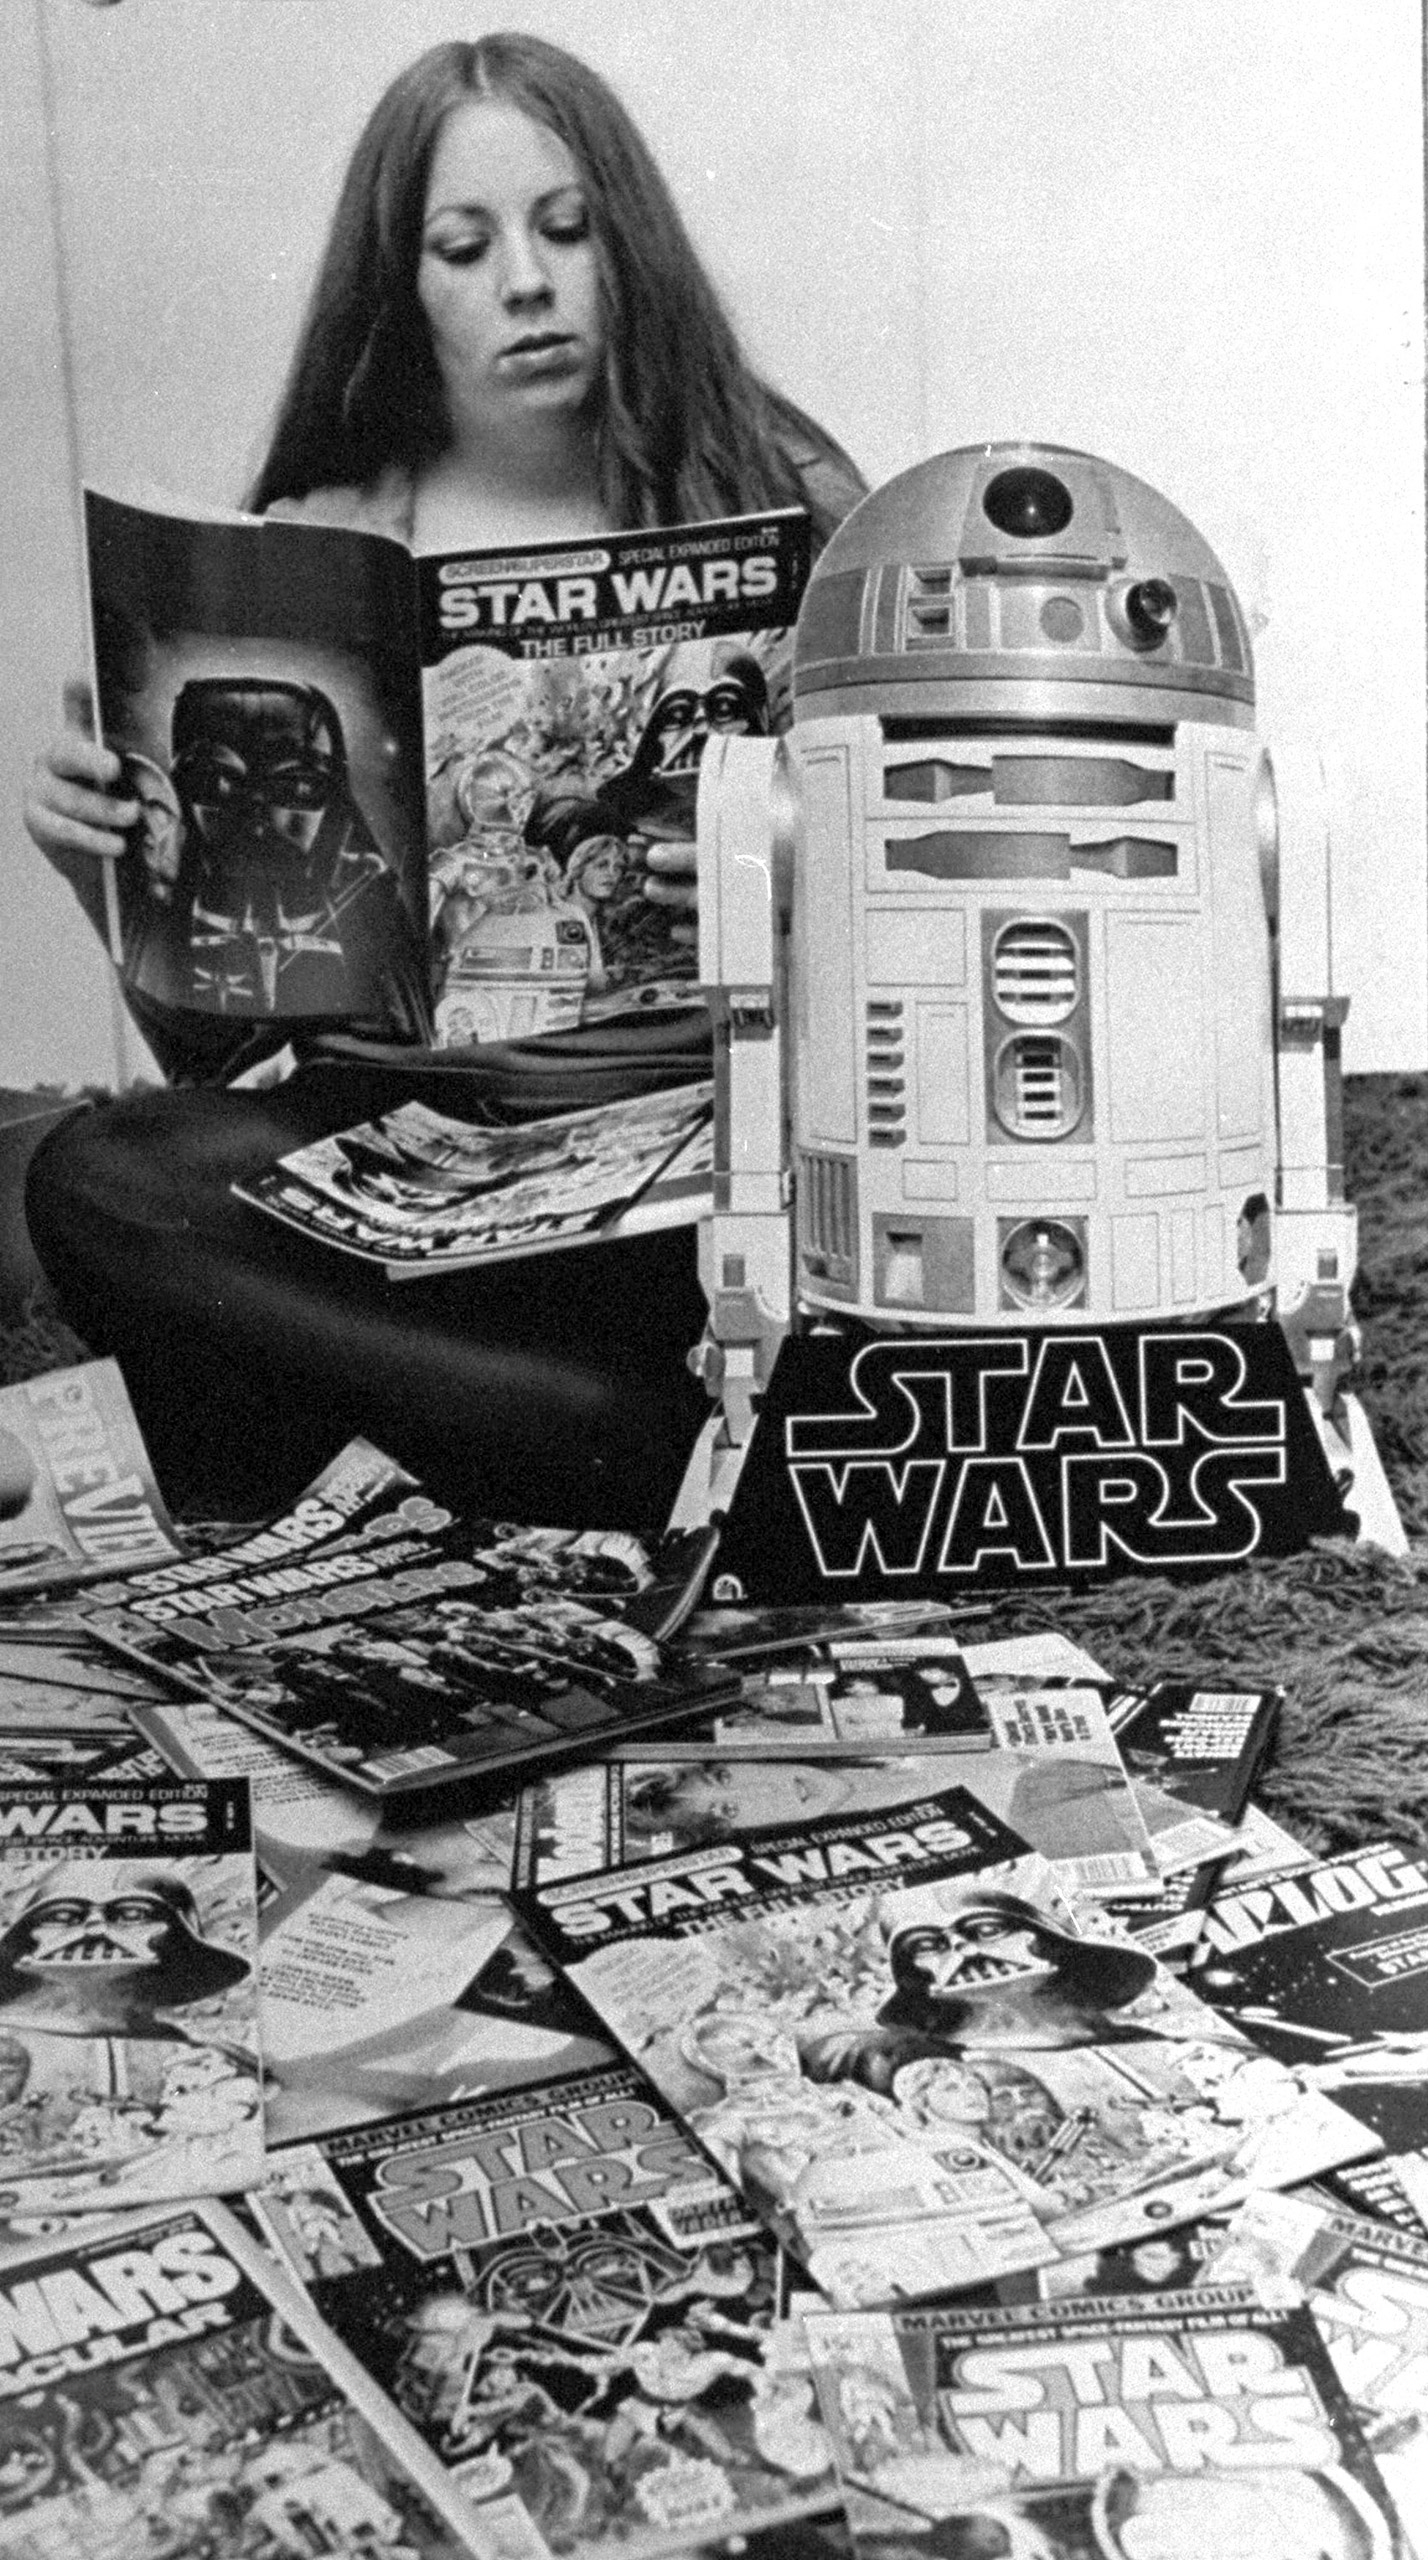 Linda Cappel with her collection of "Star Wars" memorabilia.